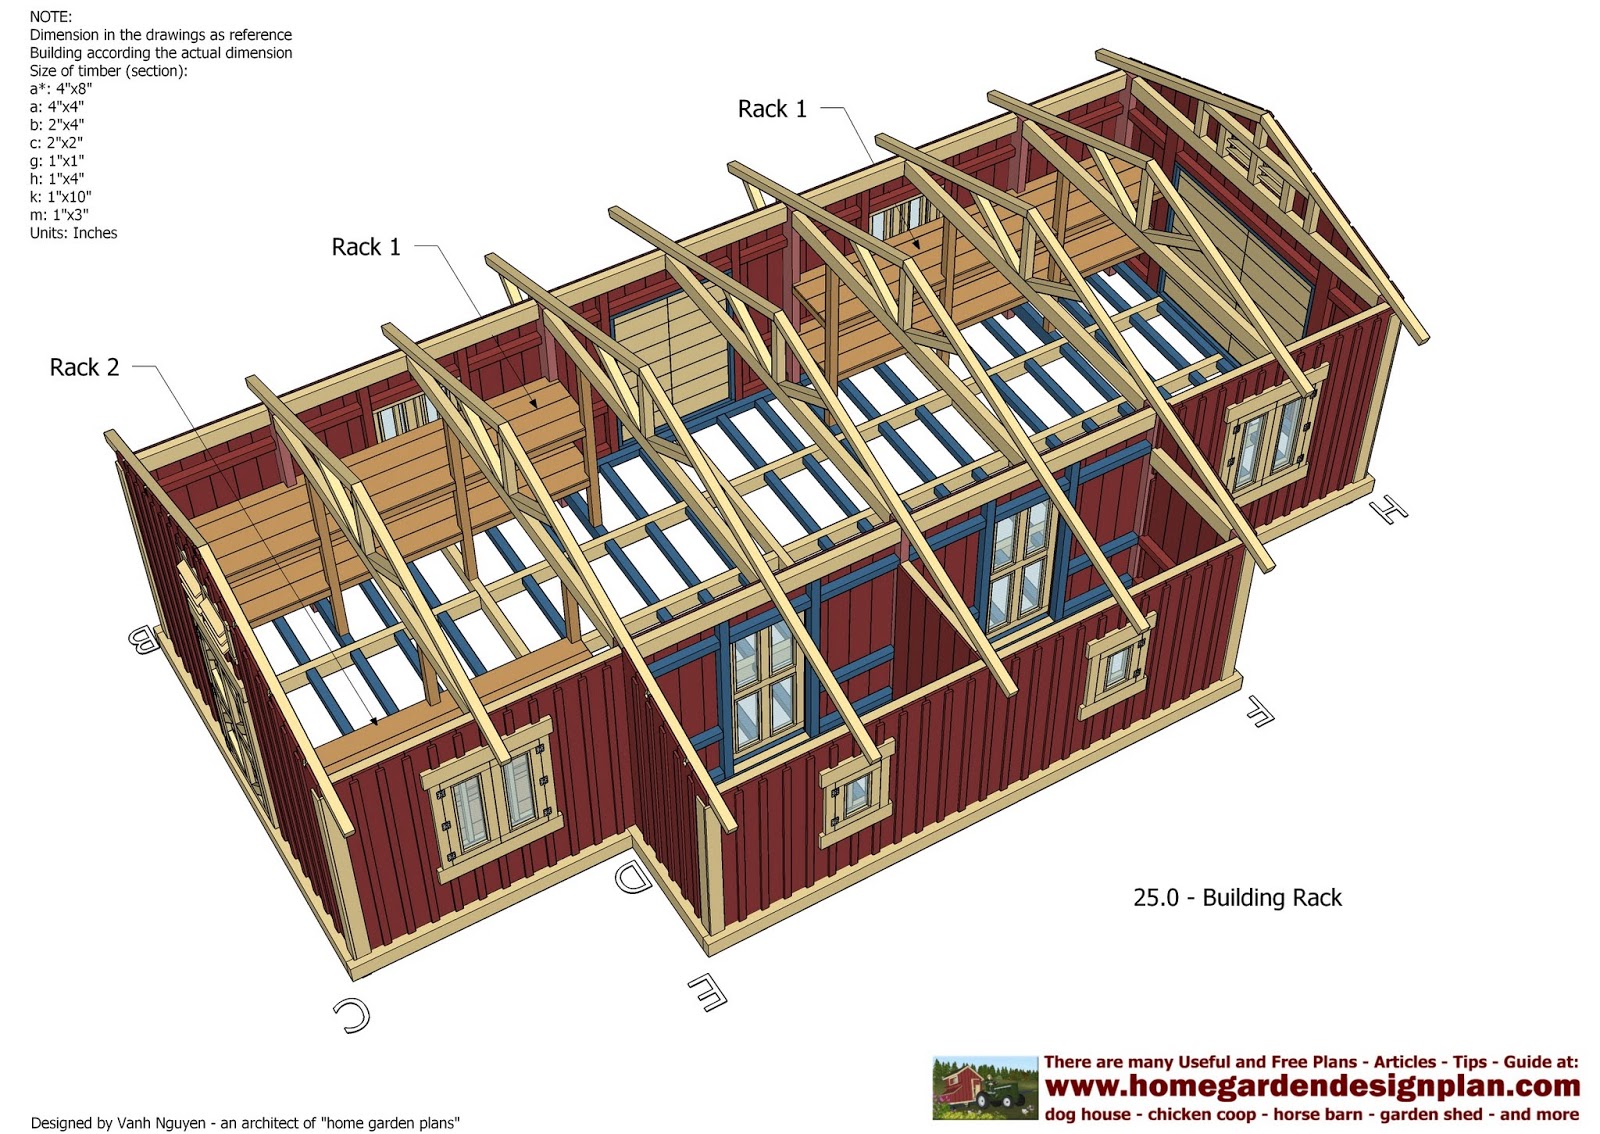  SL300 - Storage Sheds Plans - Garden Shed Plans - How To Build A Shed